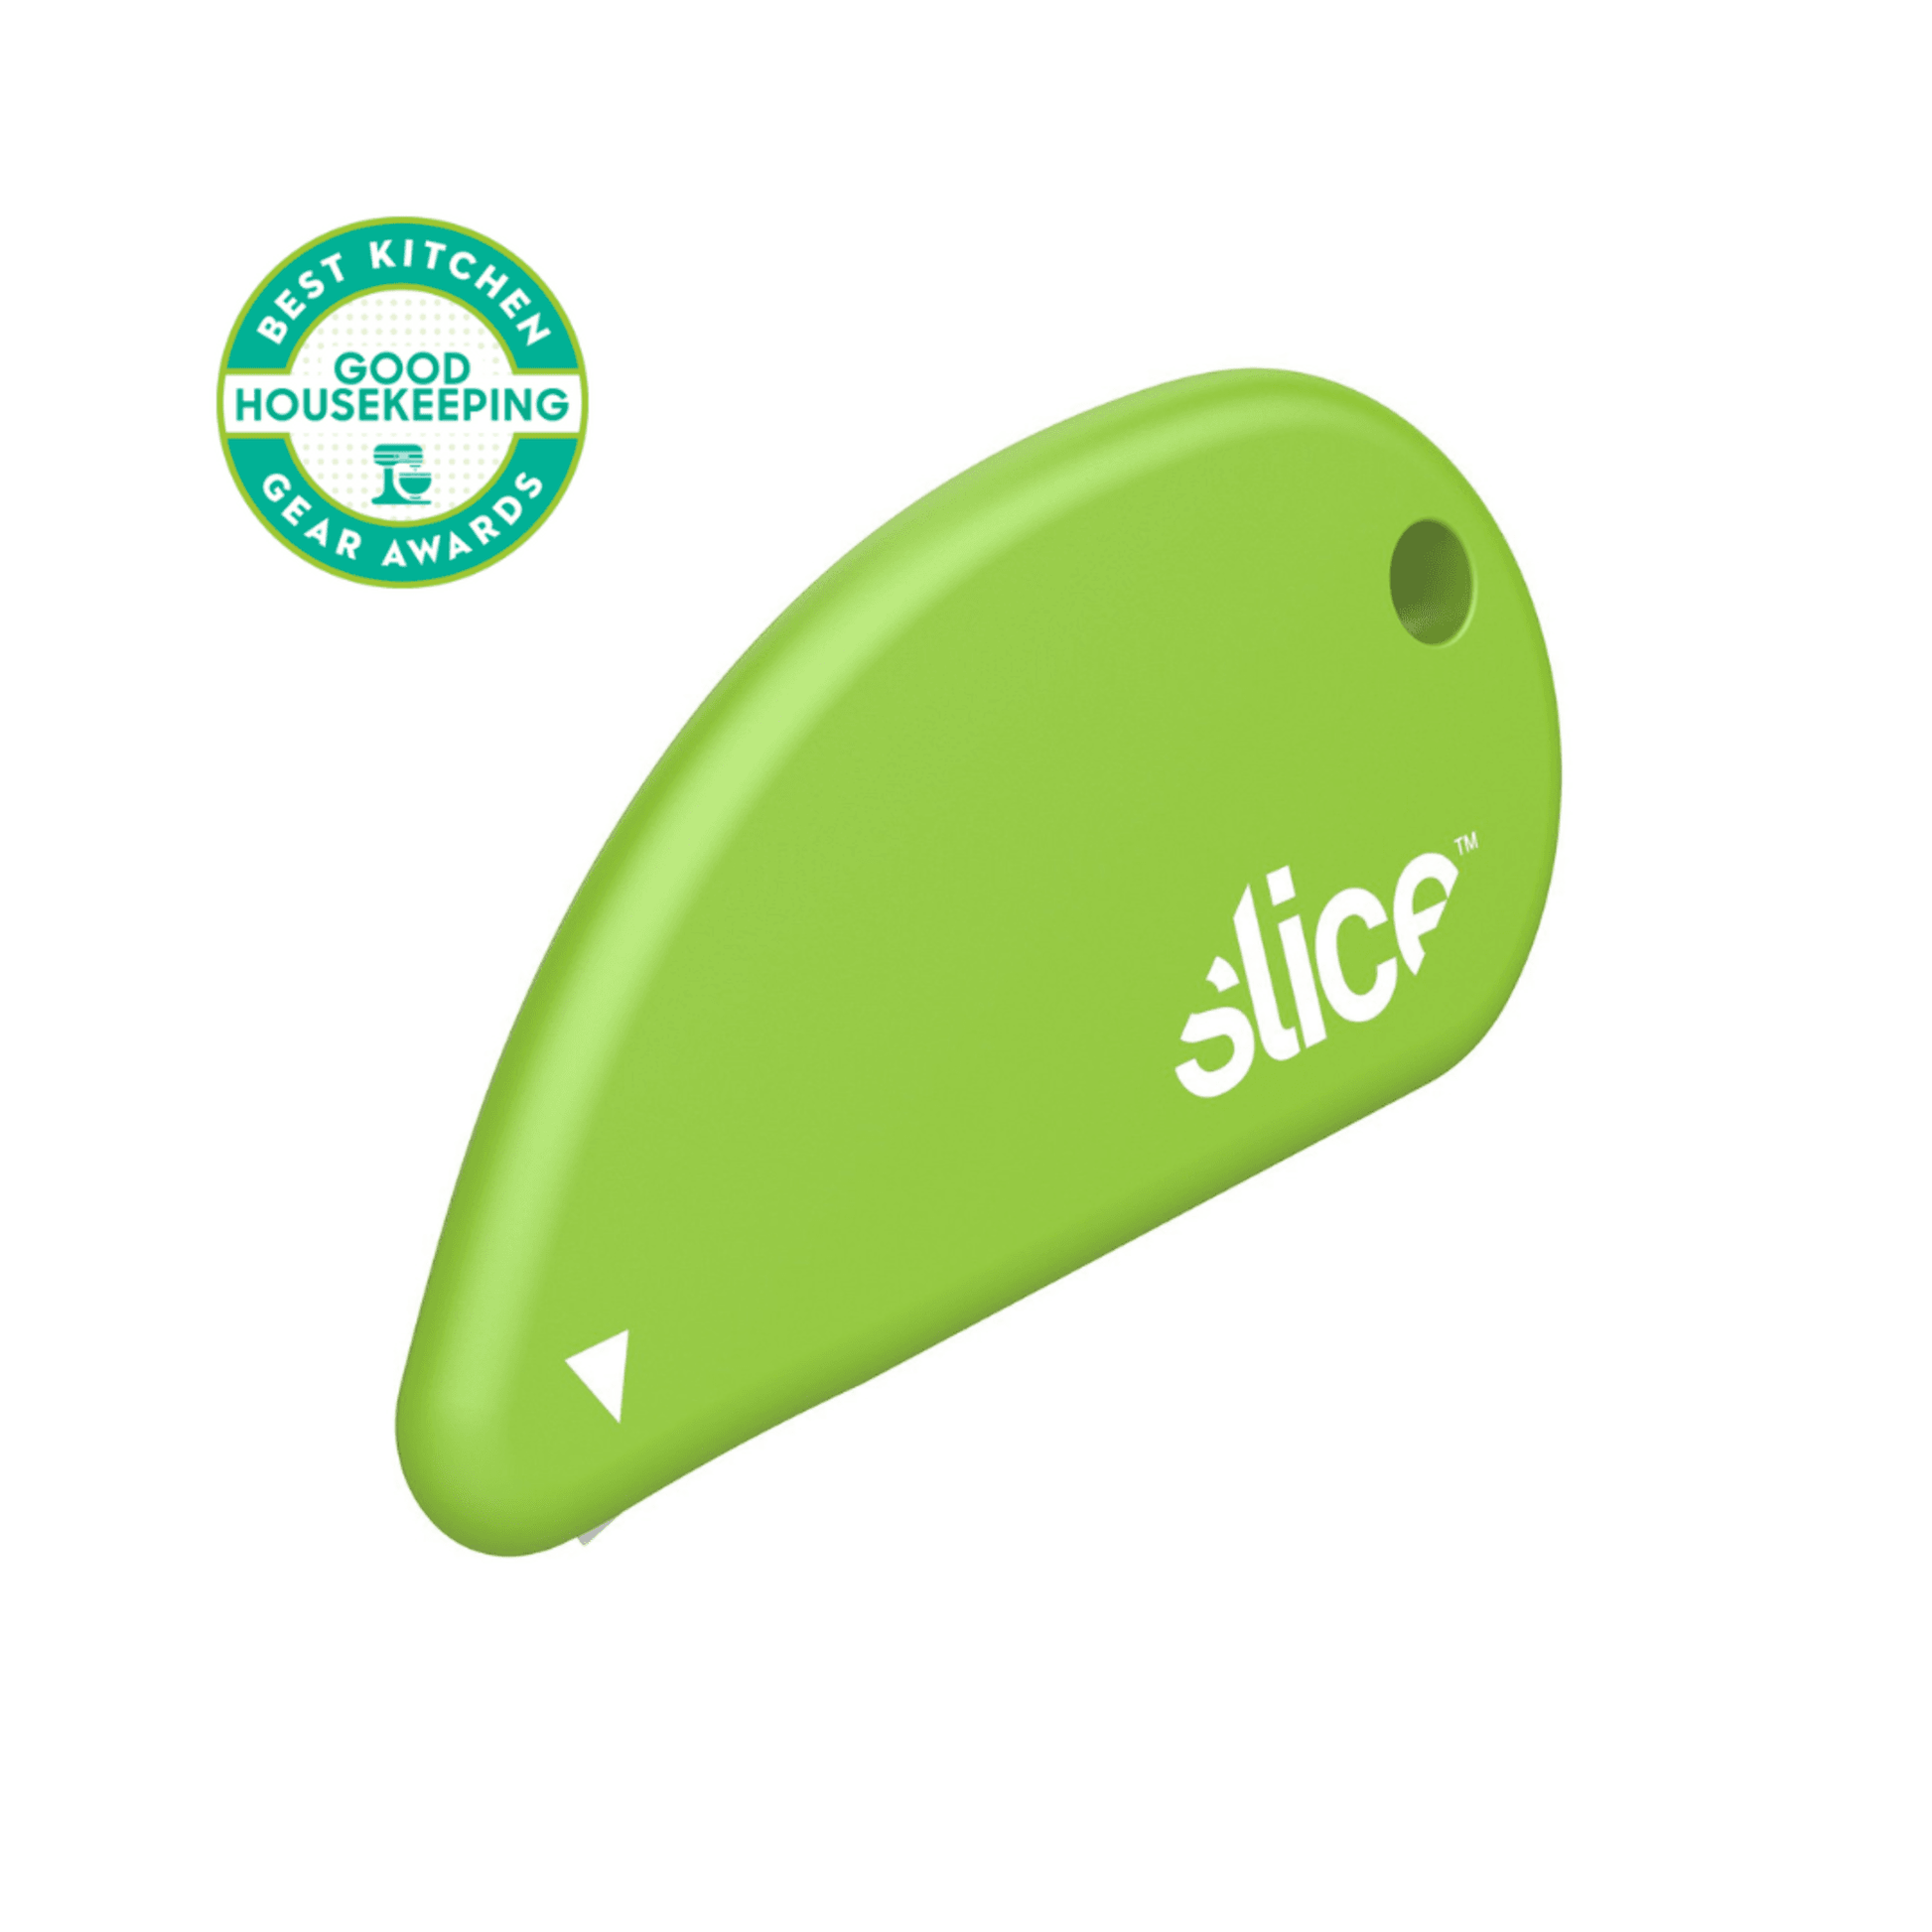 Slice Manual Mini Cutter Length: 62 mm:Facility Safety and Maintenance